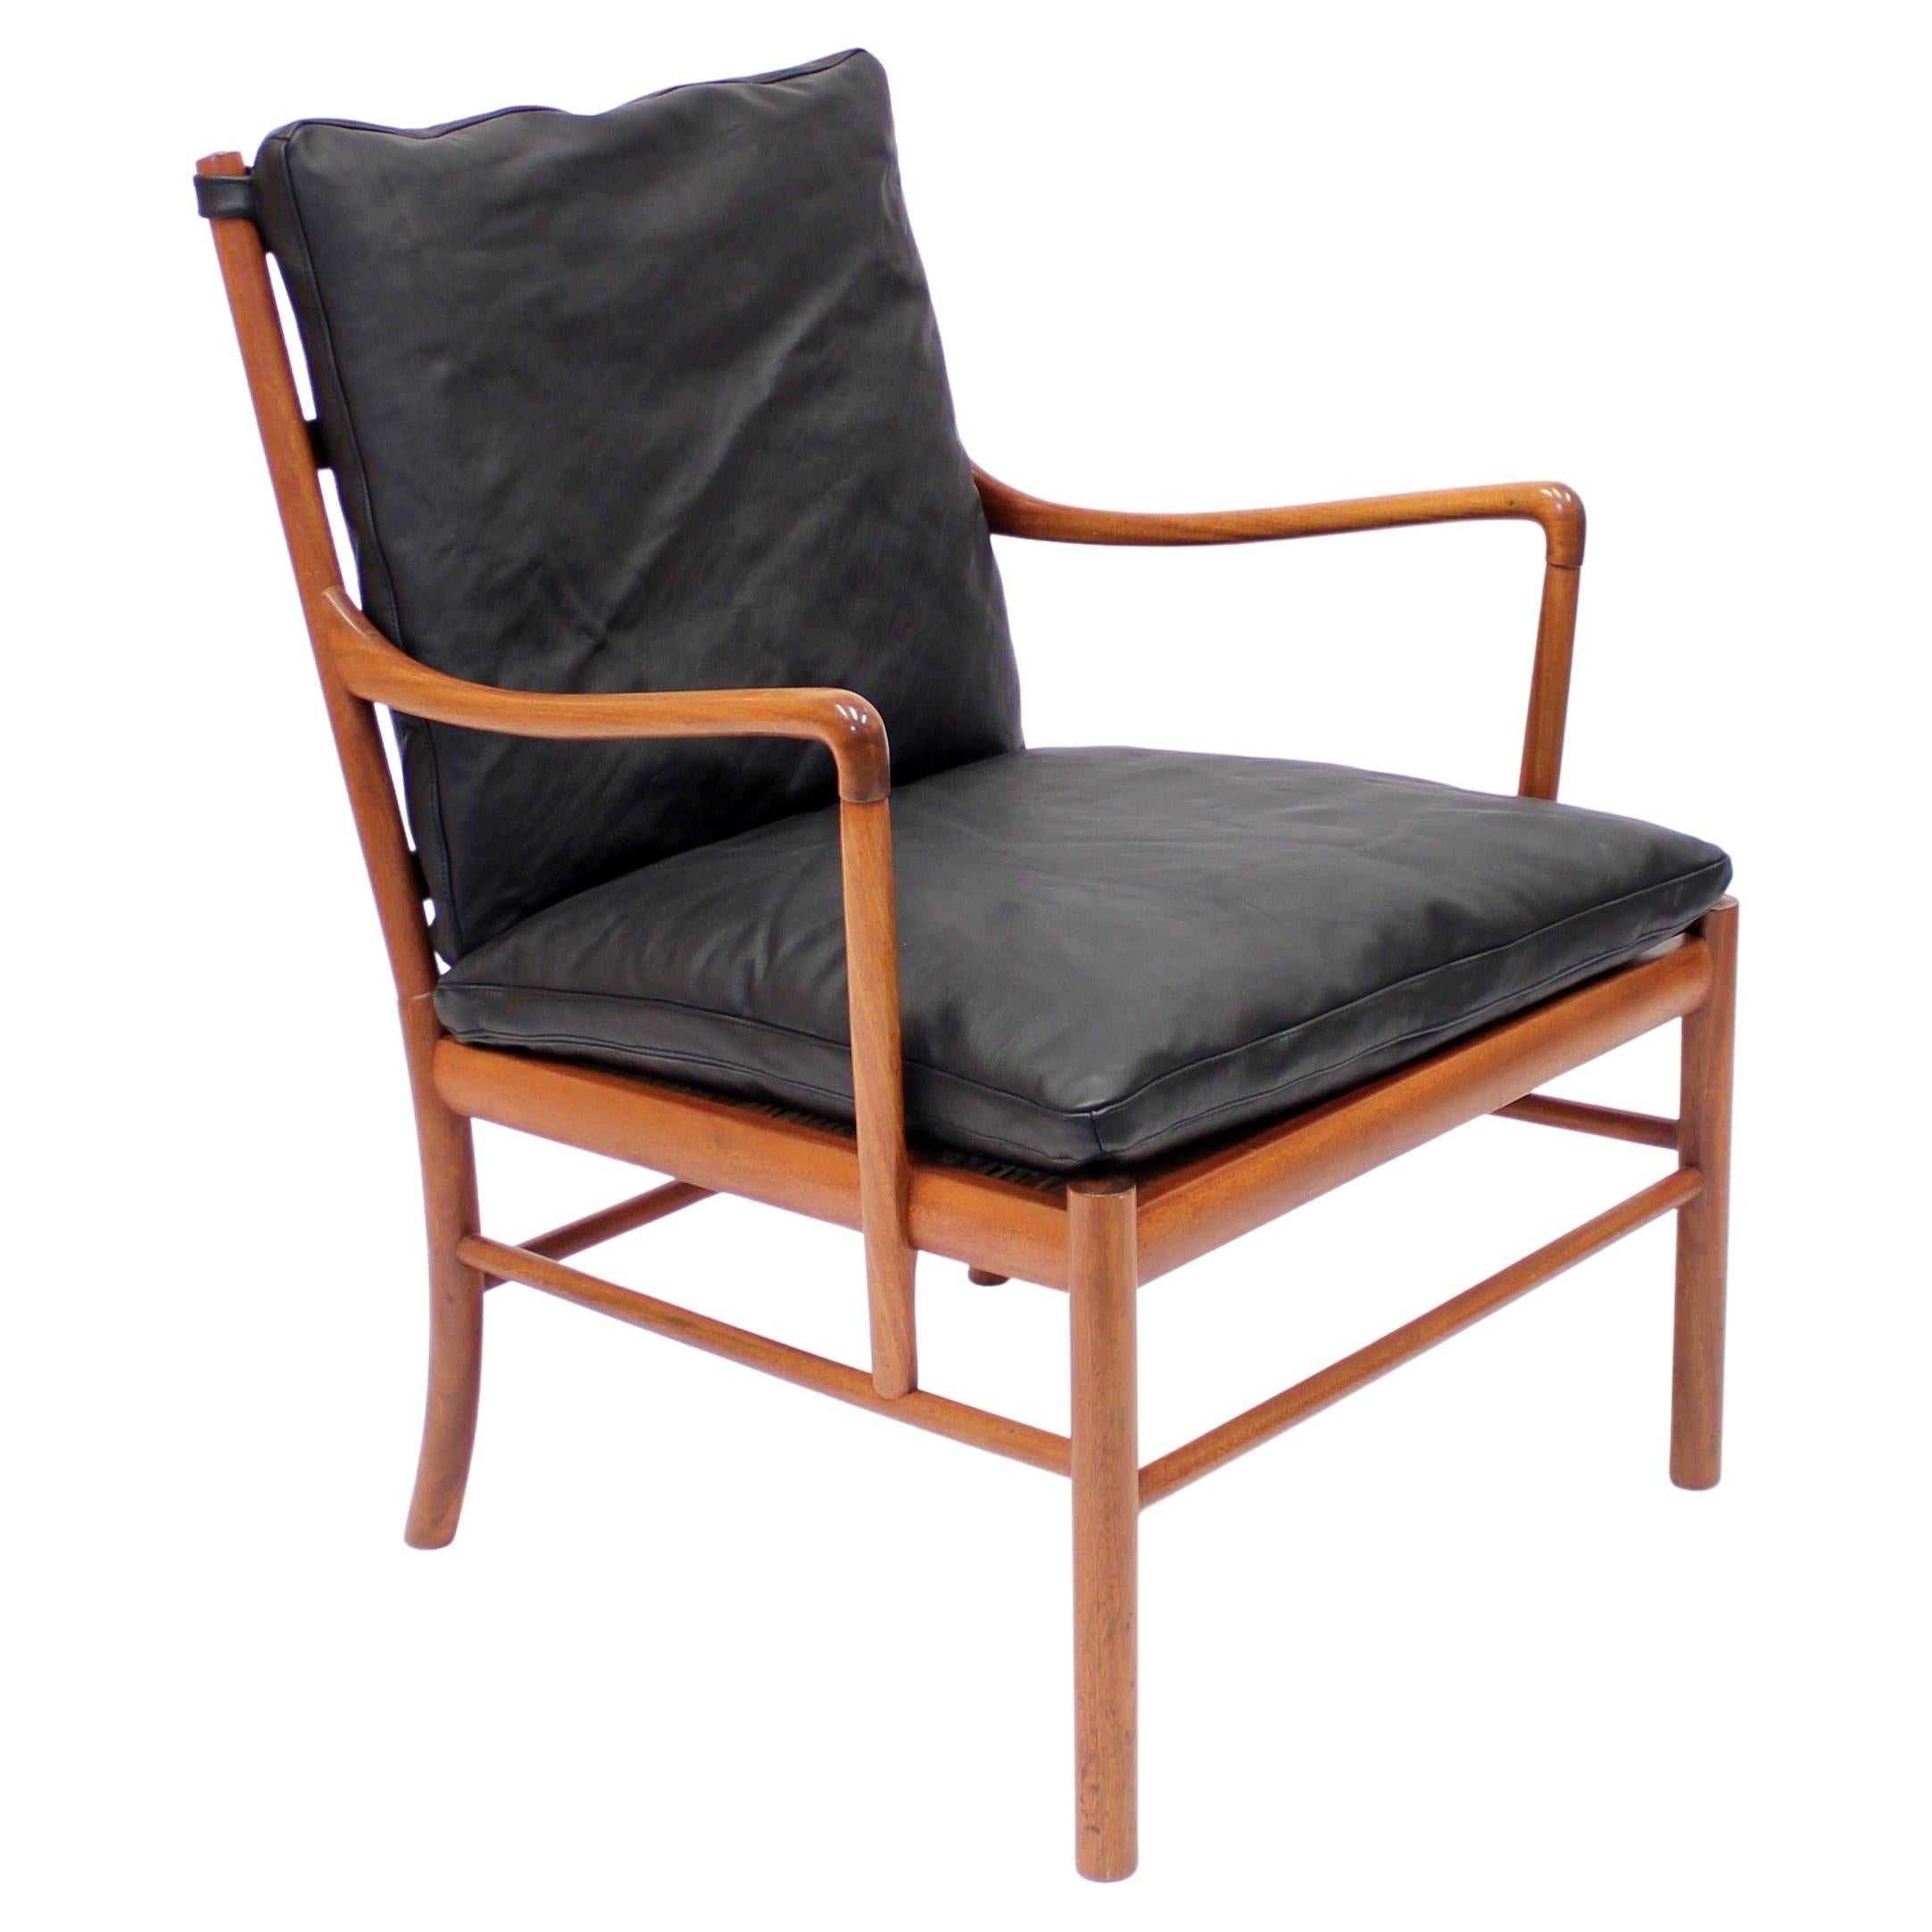 Ole Wanscher, Colonial Chair, P. Jeppesen, Late 20th Century